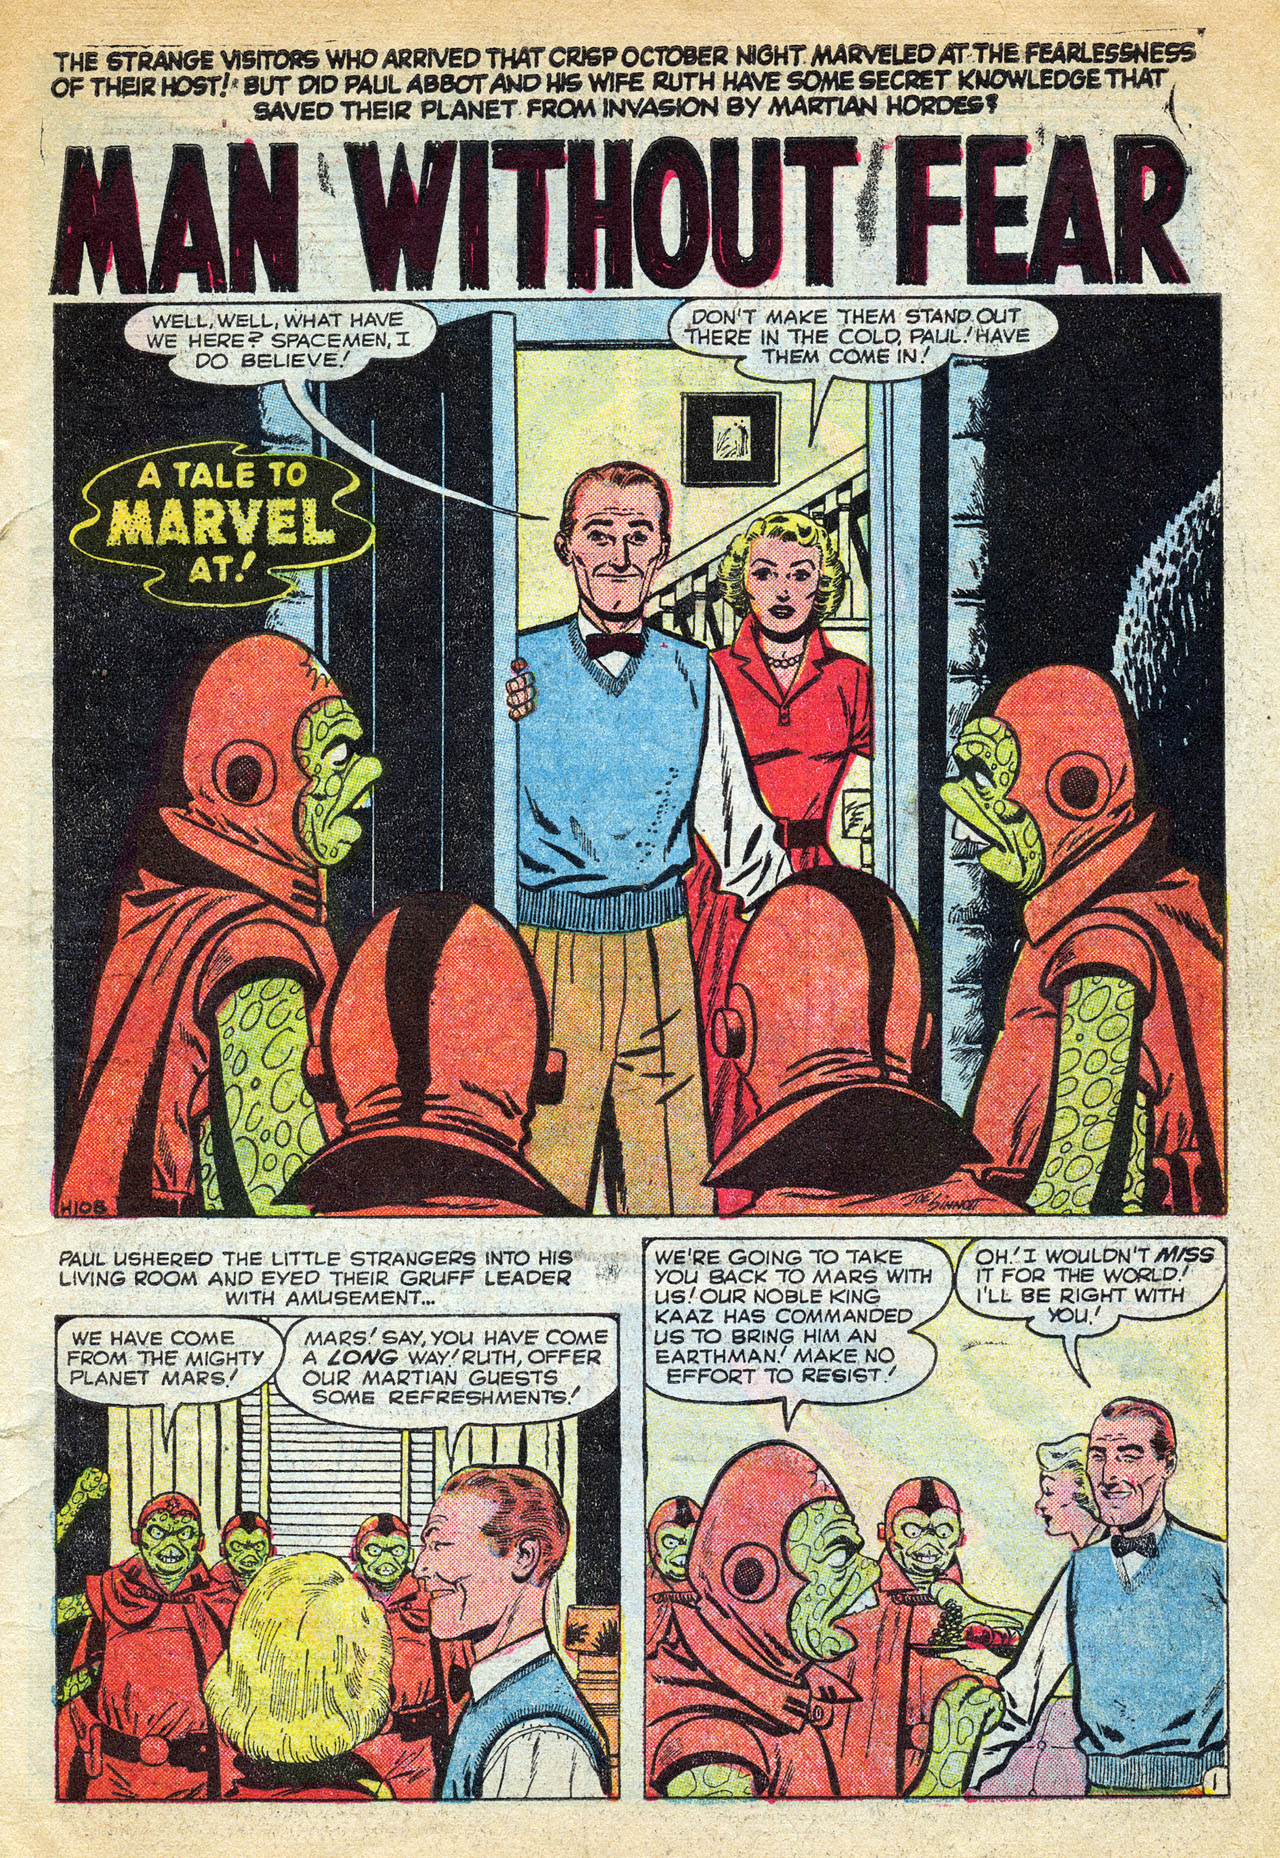 Marvel Tales (1949) 140 Page 2